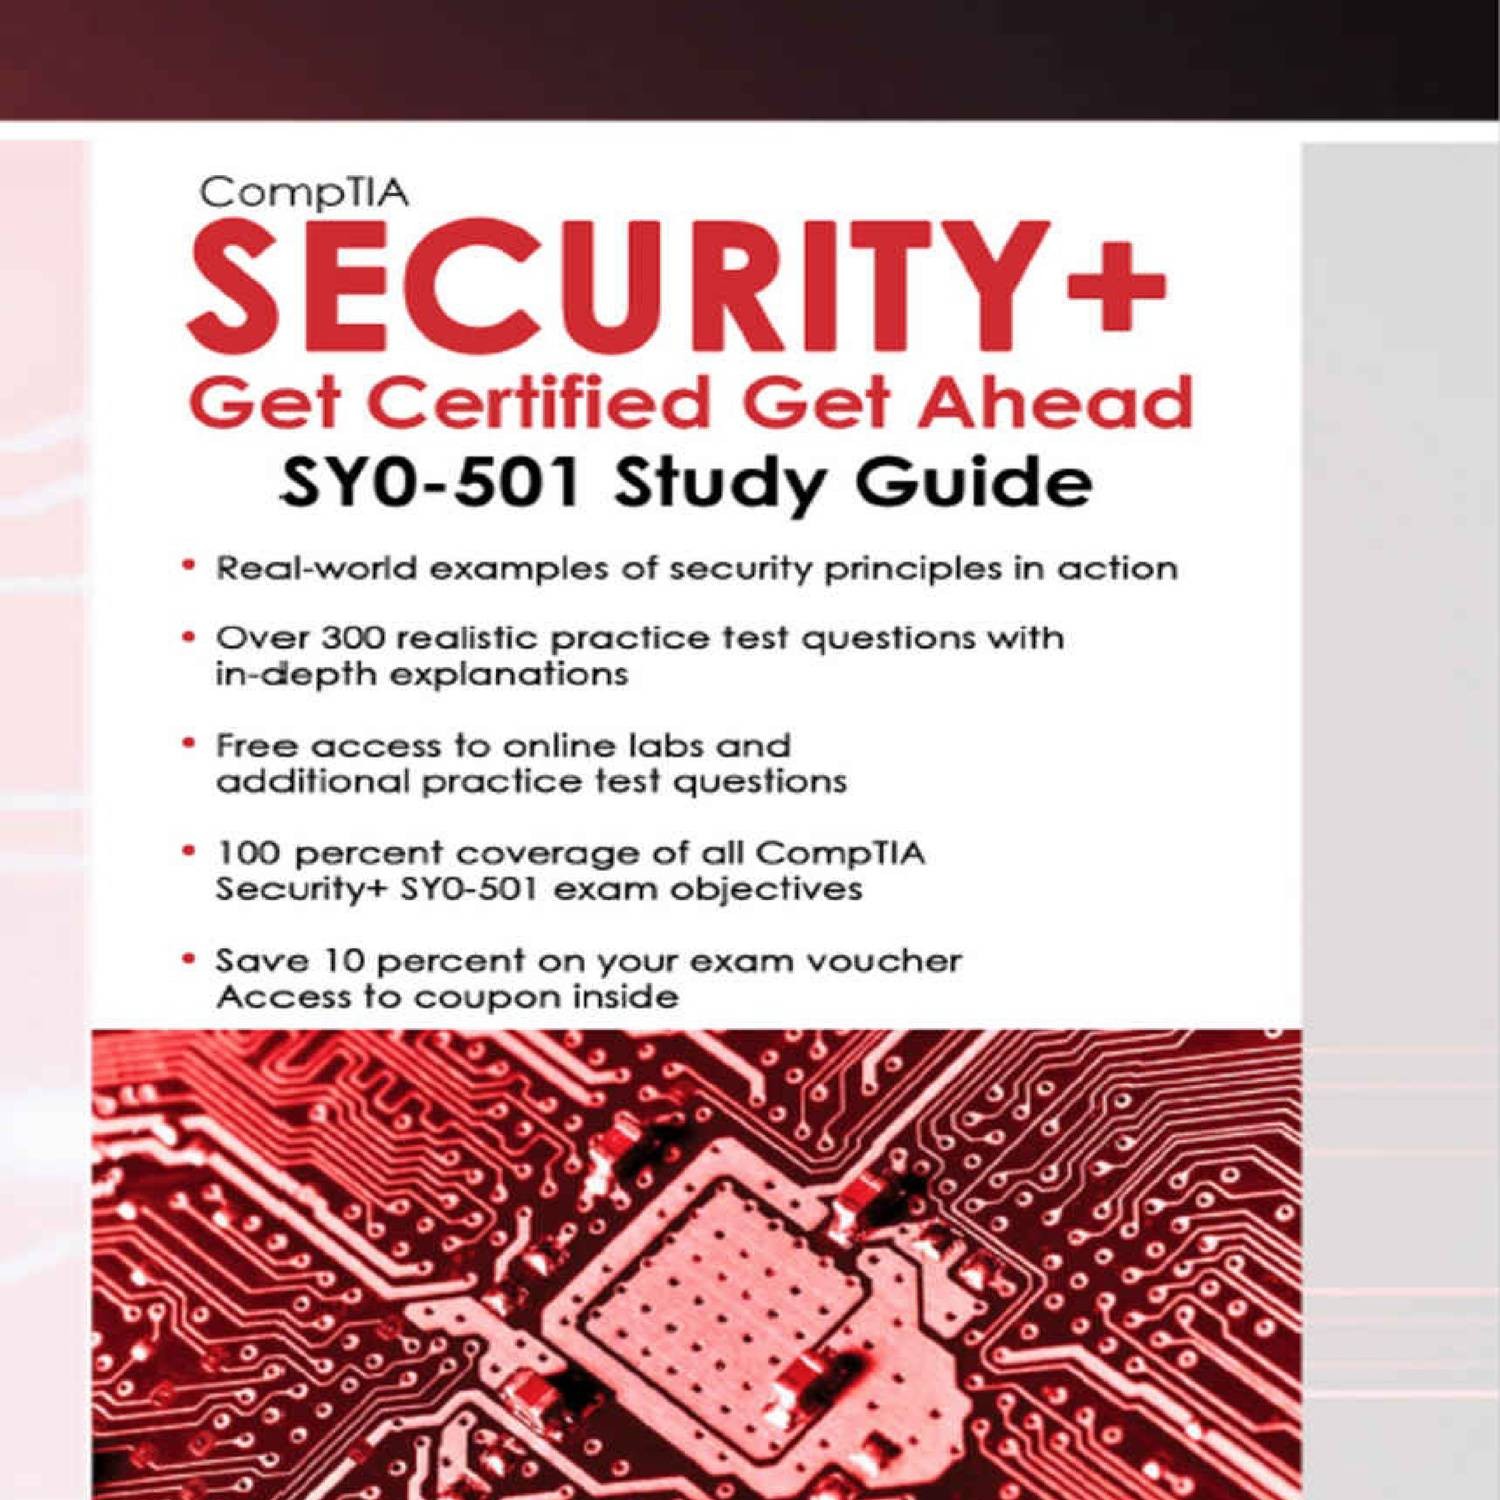 Comptia Security Get Certified Get Ahead Sy0 601 Study Guide Pdf - All ...